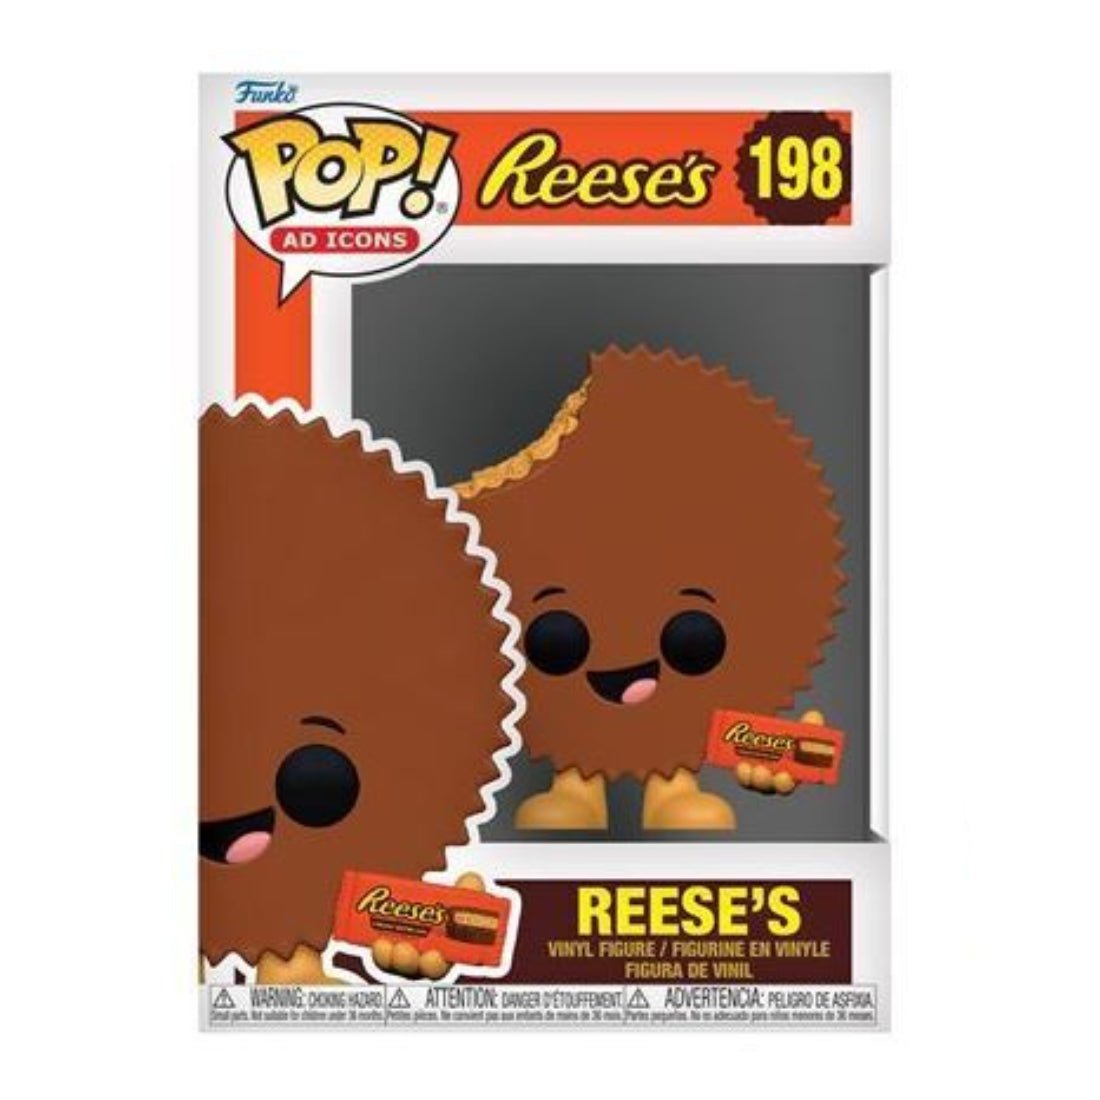 Funko Pop! Icons: Reese's - Candy Package #198 - دمية - Store 974 | ستور ٩٧٤